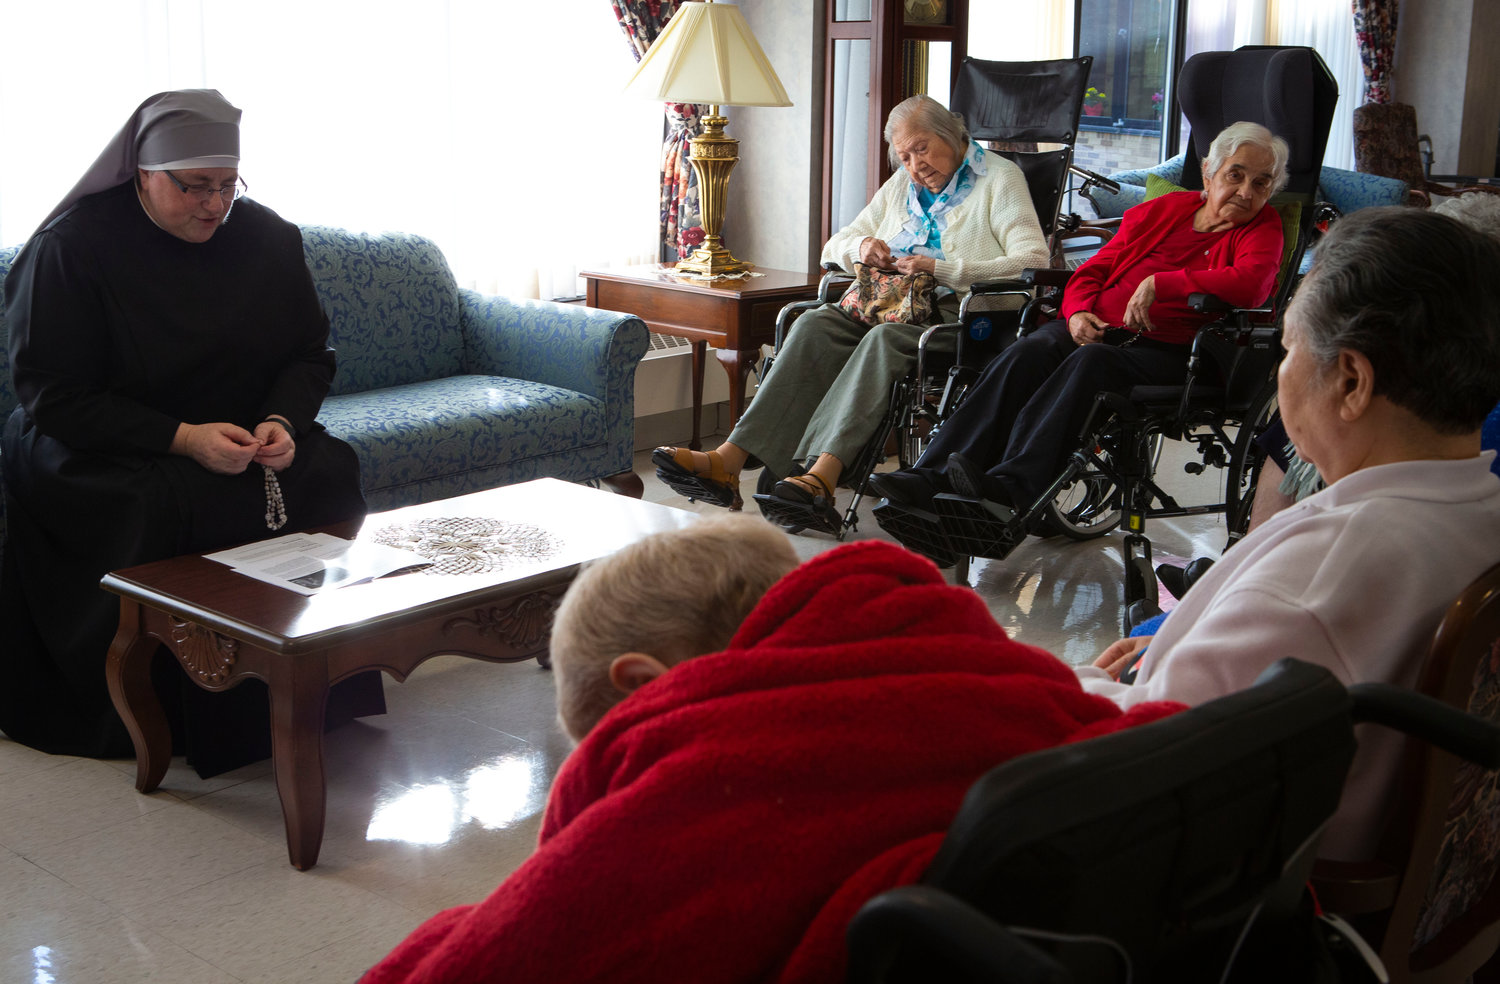 Sister Constance Veit, a Little Sister of the Poor, prays the rosary March 25, 2019, with elderly residents of the Jeanne Jugan Residence for senior care in Washington. Sister Constance is considered a spiritual mother by many of the residents, who said they will honor her on Mother’s Day.